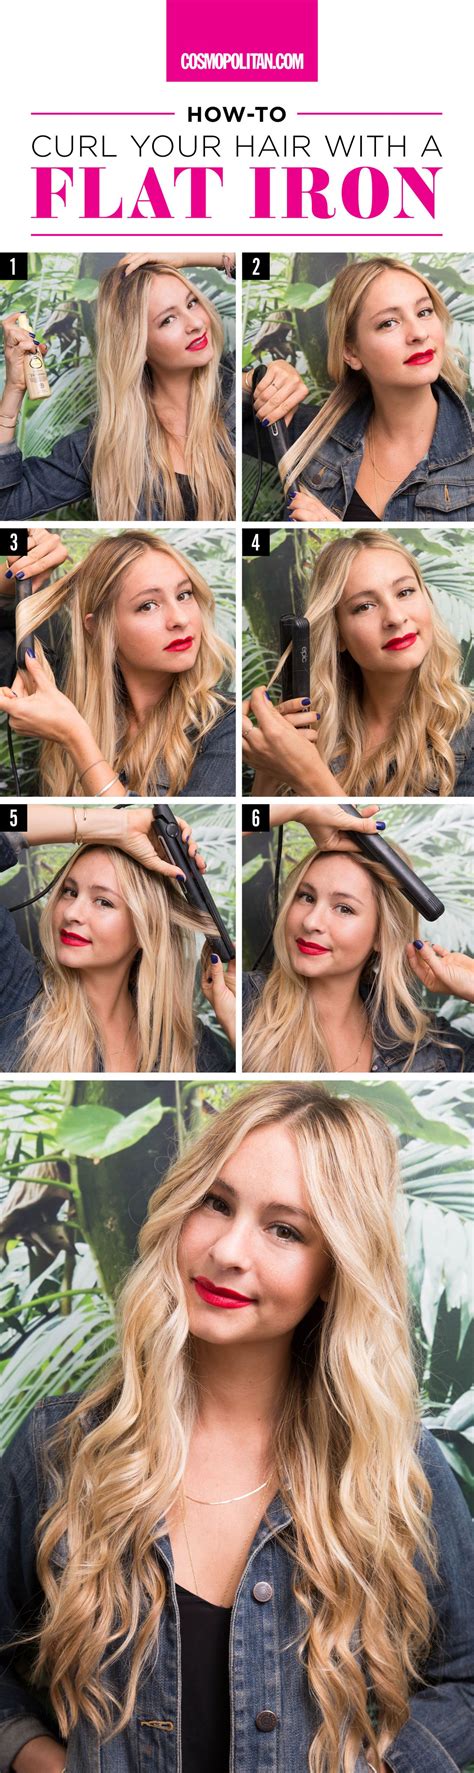 22 How To Curl Hair With Flat Iron Beach Waves